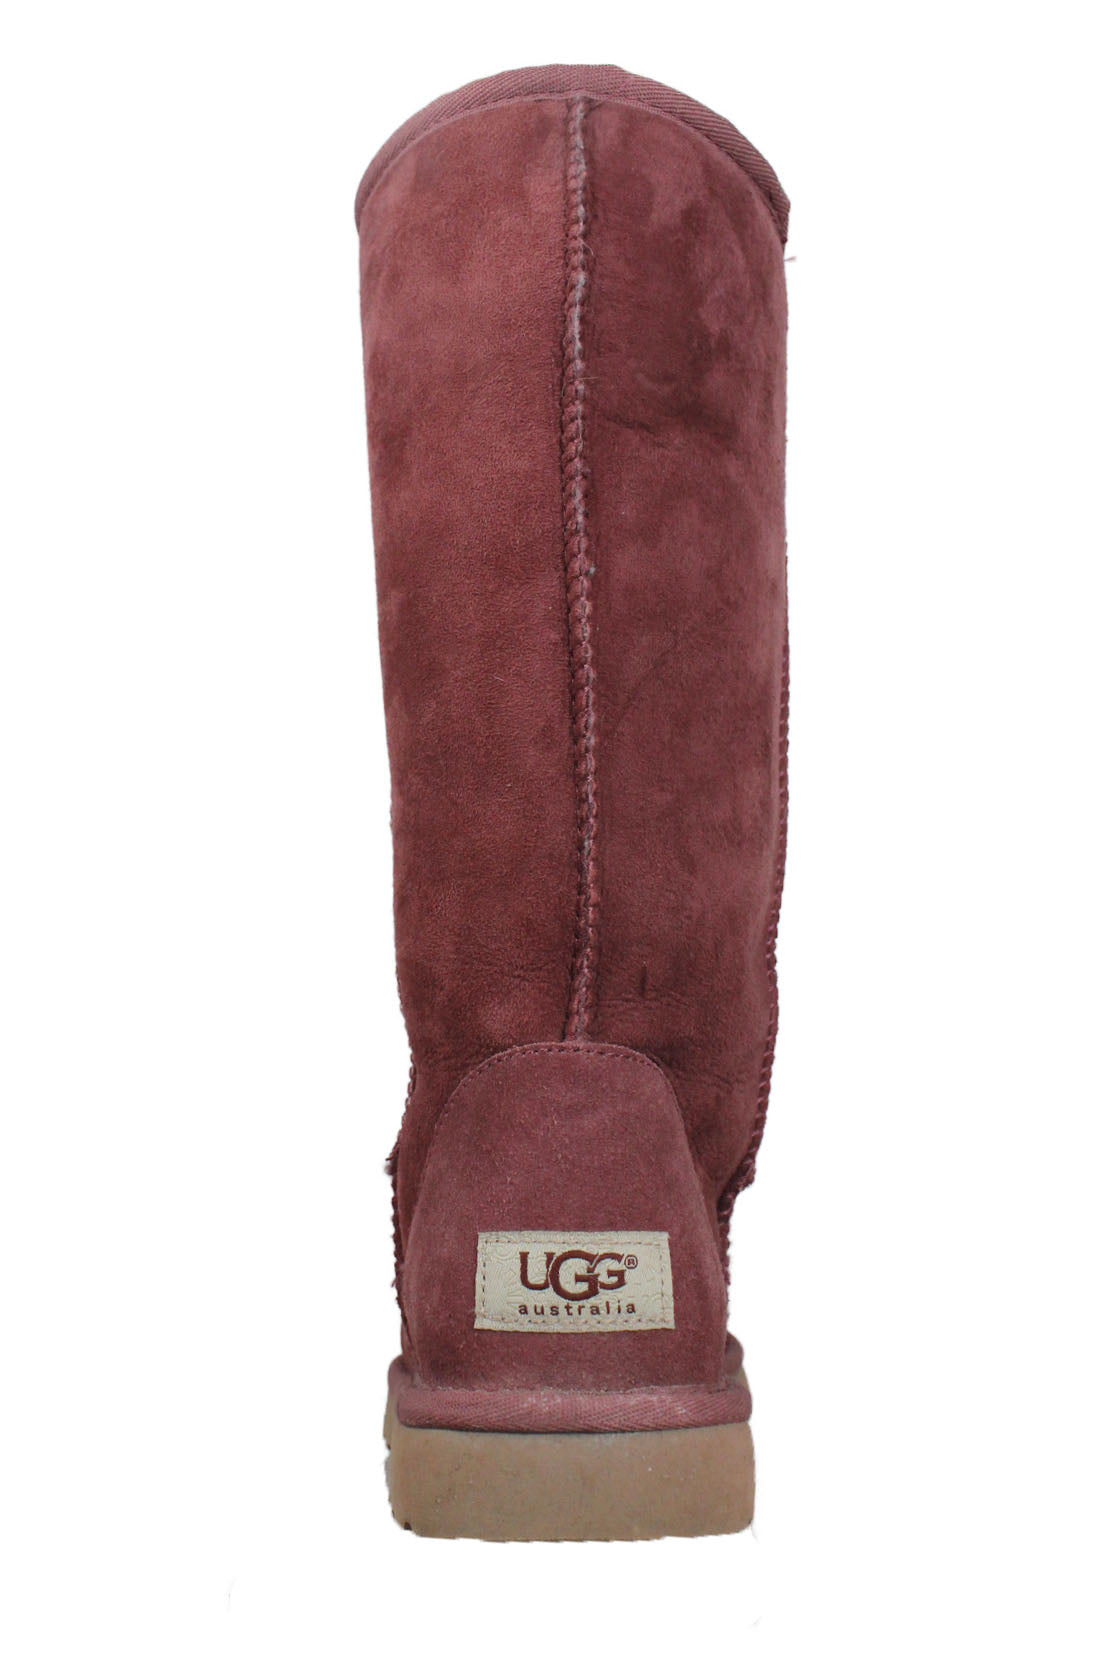 back of boot. ugg brand patch at back of heel